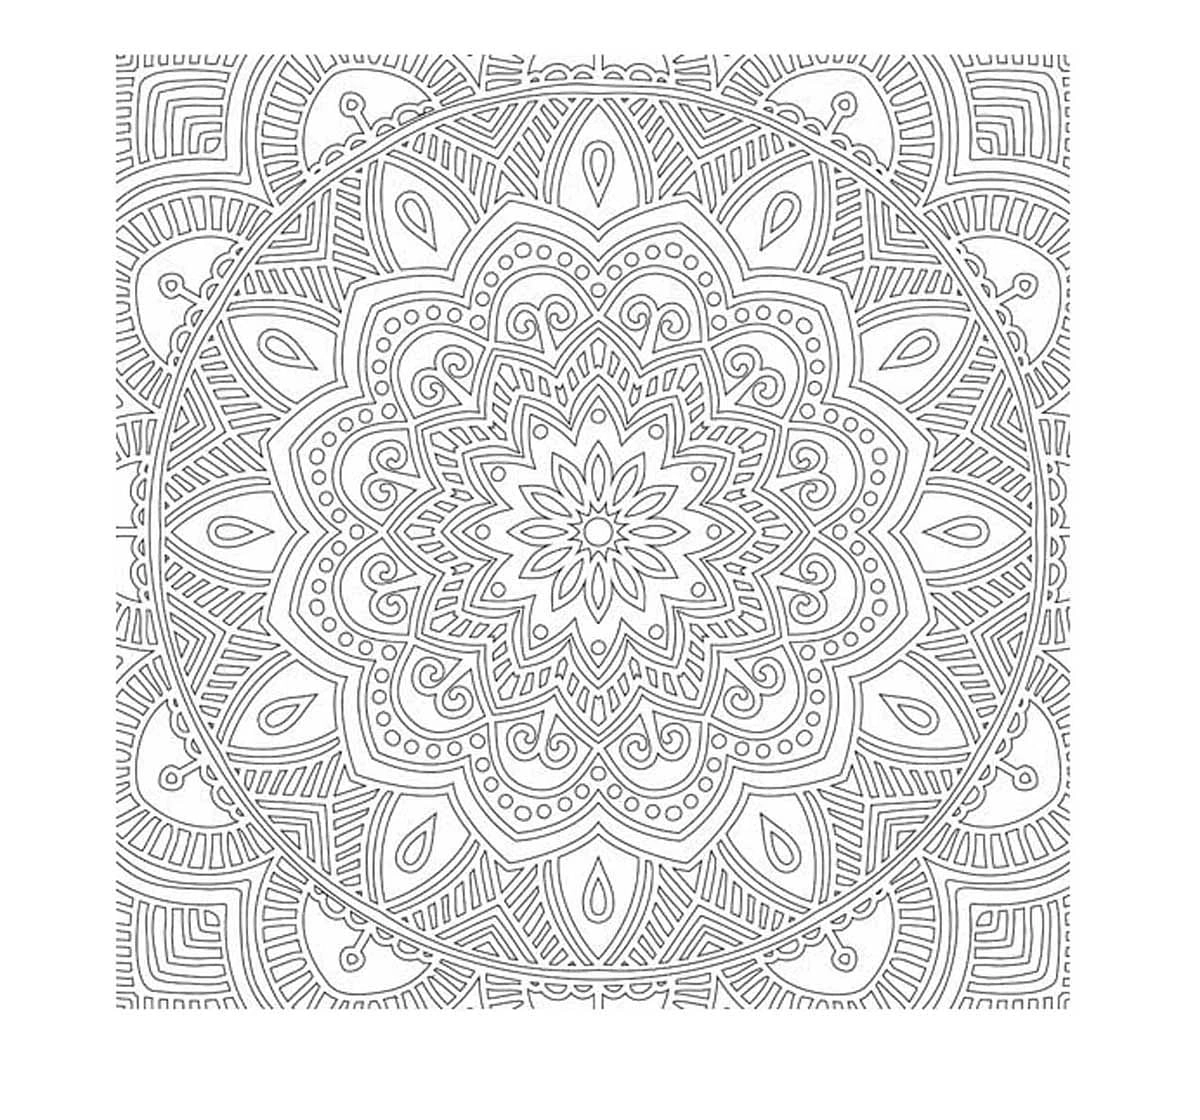 Dreamland Paper Back Refreshing Mandala Colouring Book Pack of 5 for kids 3Y+, Multicolour